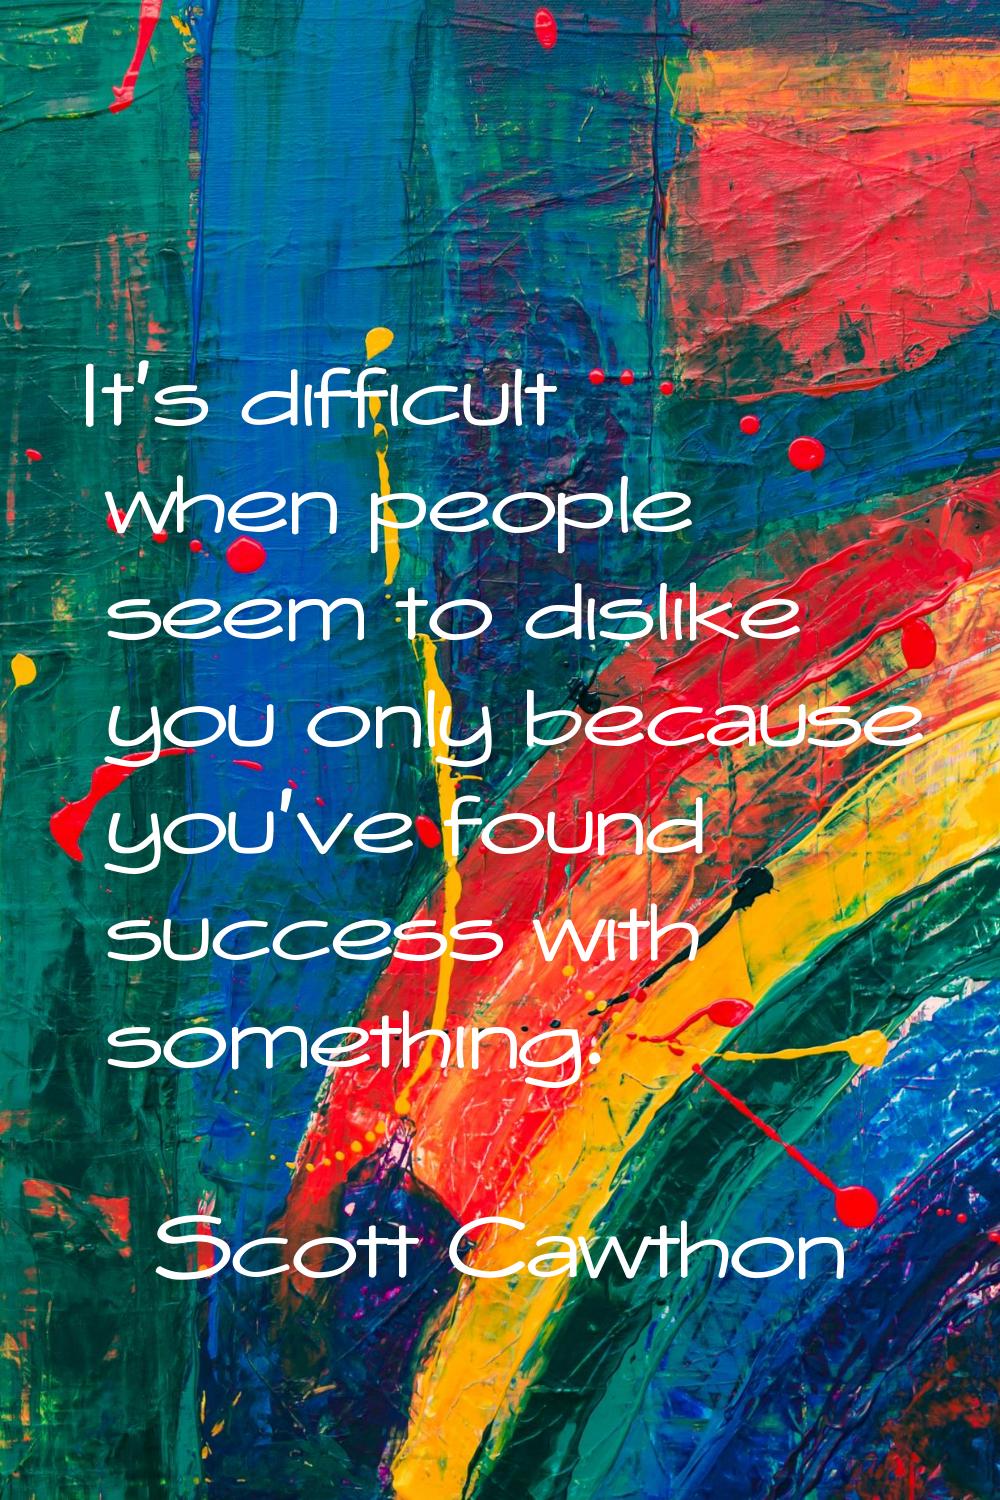 It's difficult when people seem to dislike you only because you've found success with something.